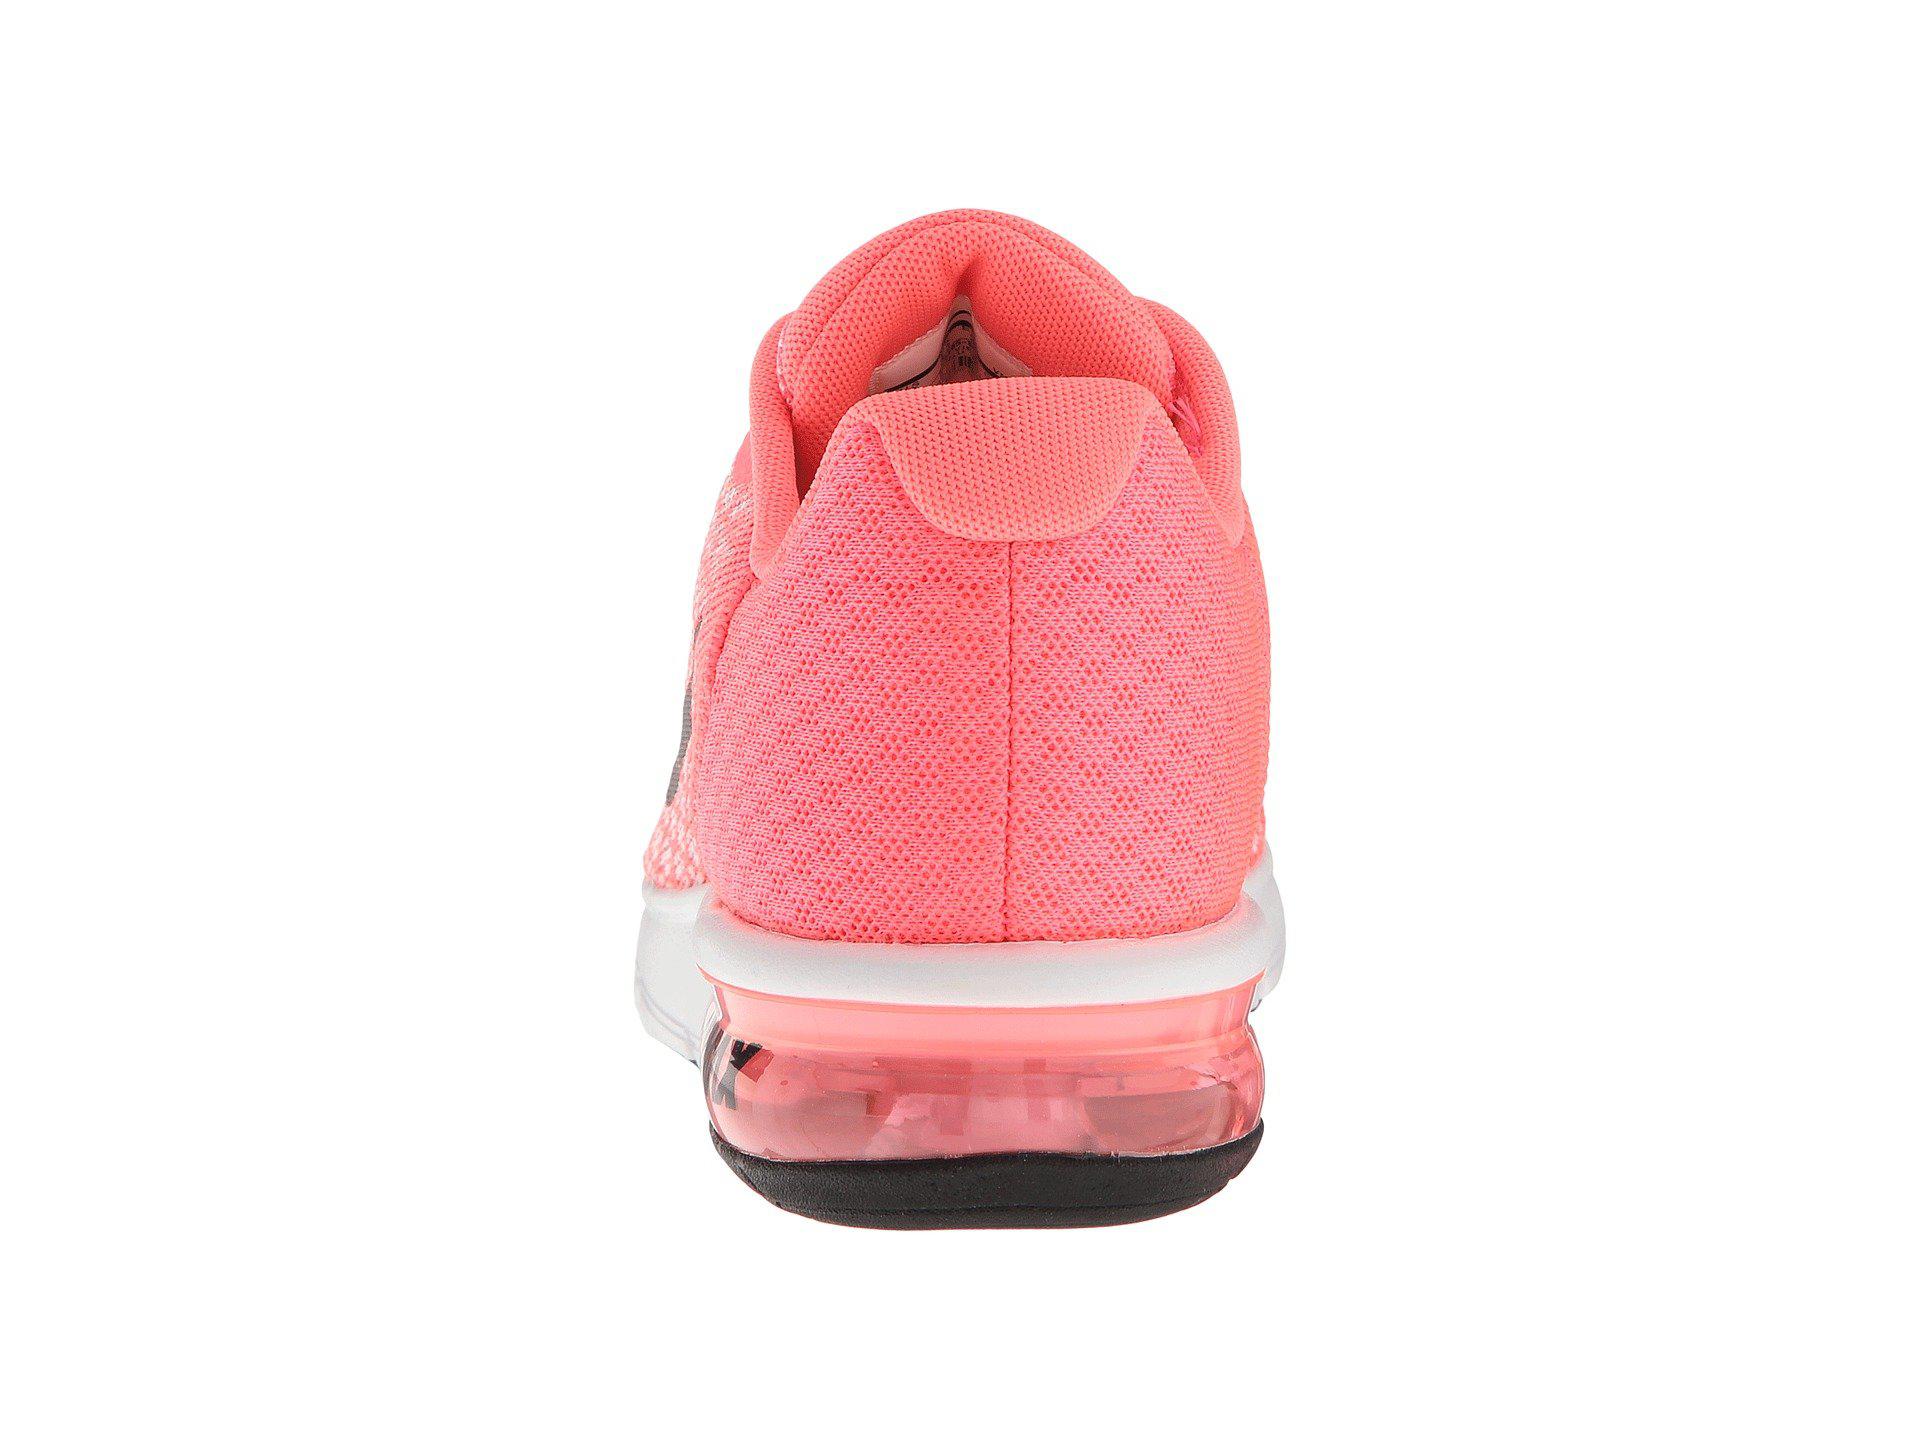 Nike Synthetic Air Max Sequent 2 in Pink | Lyst